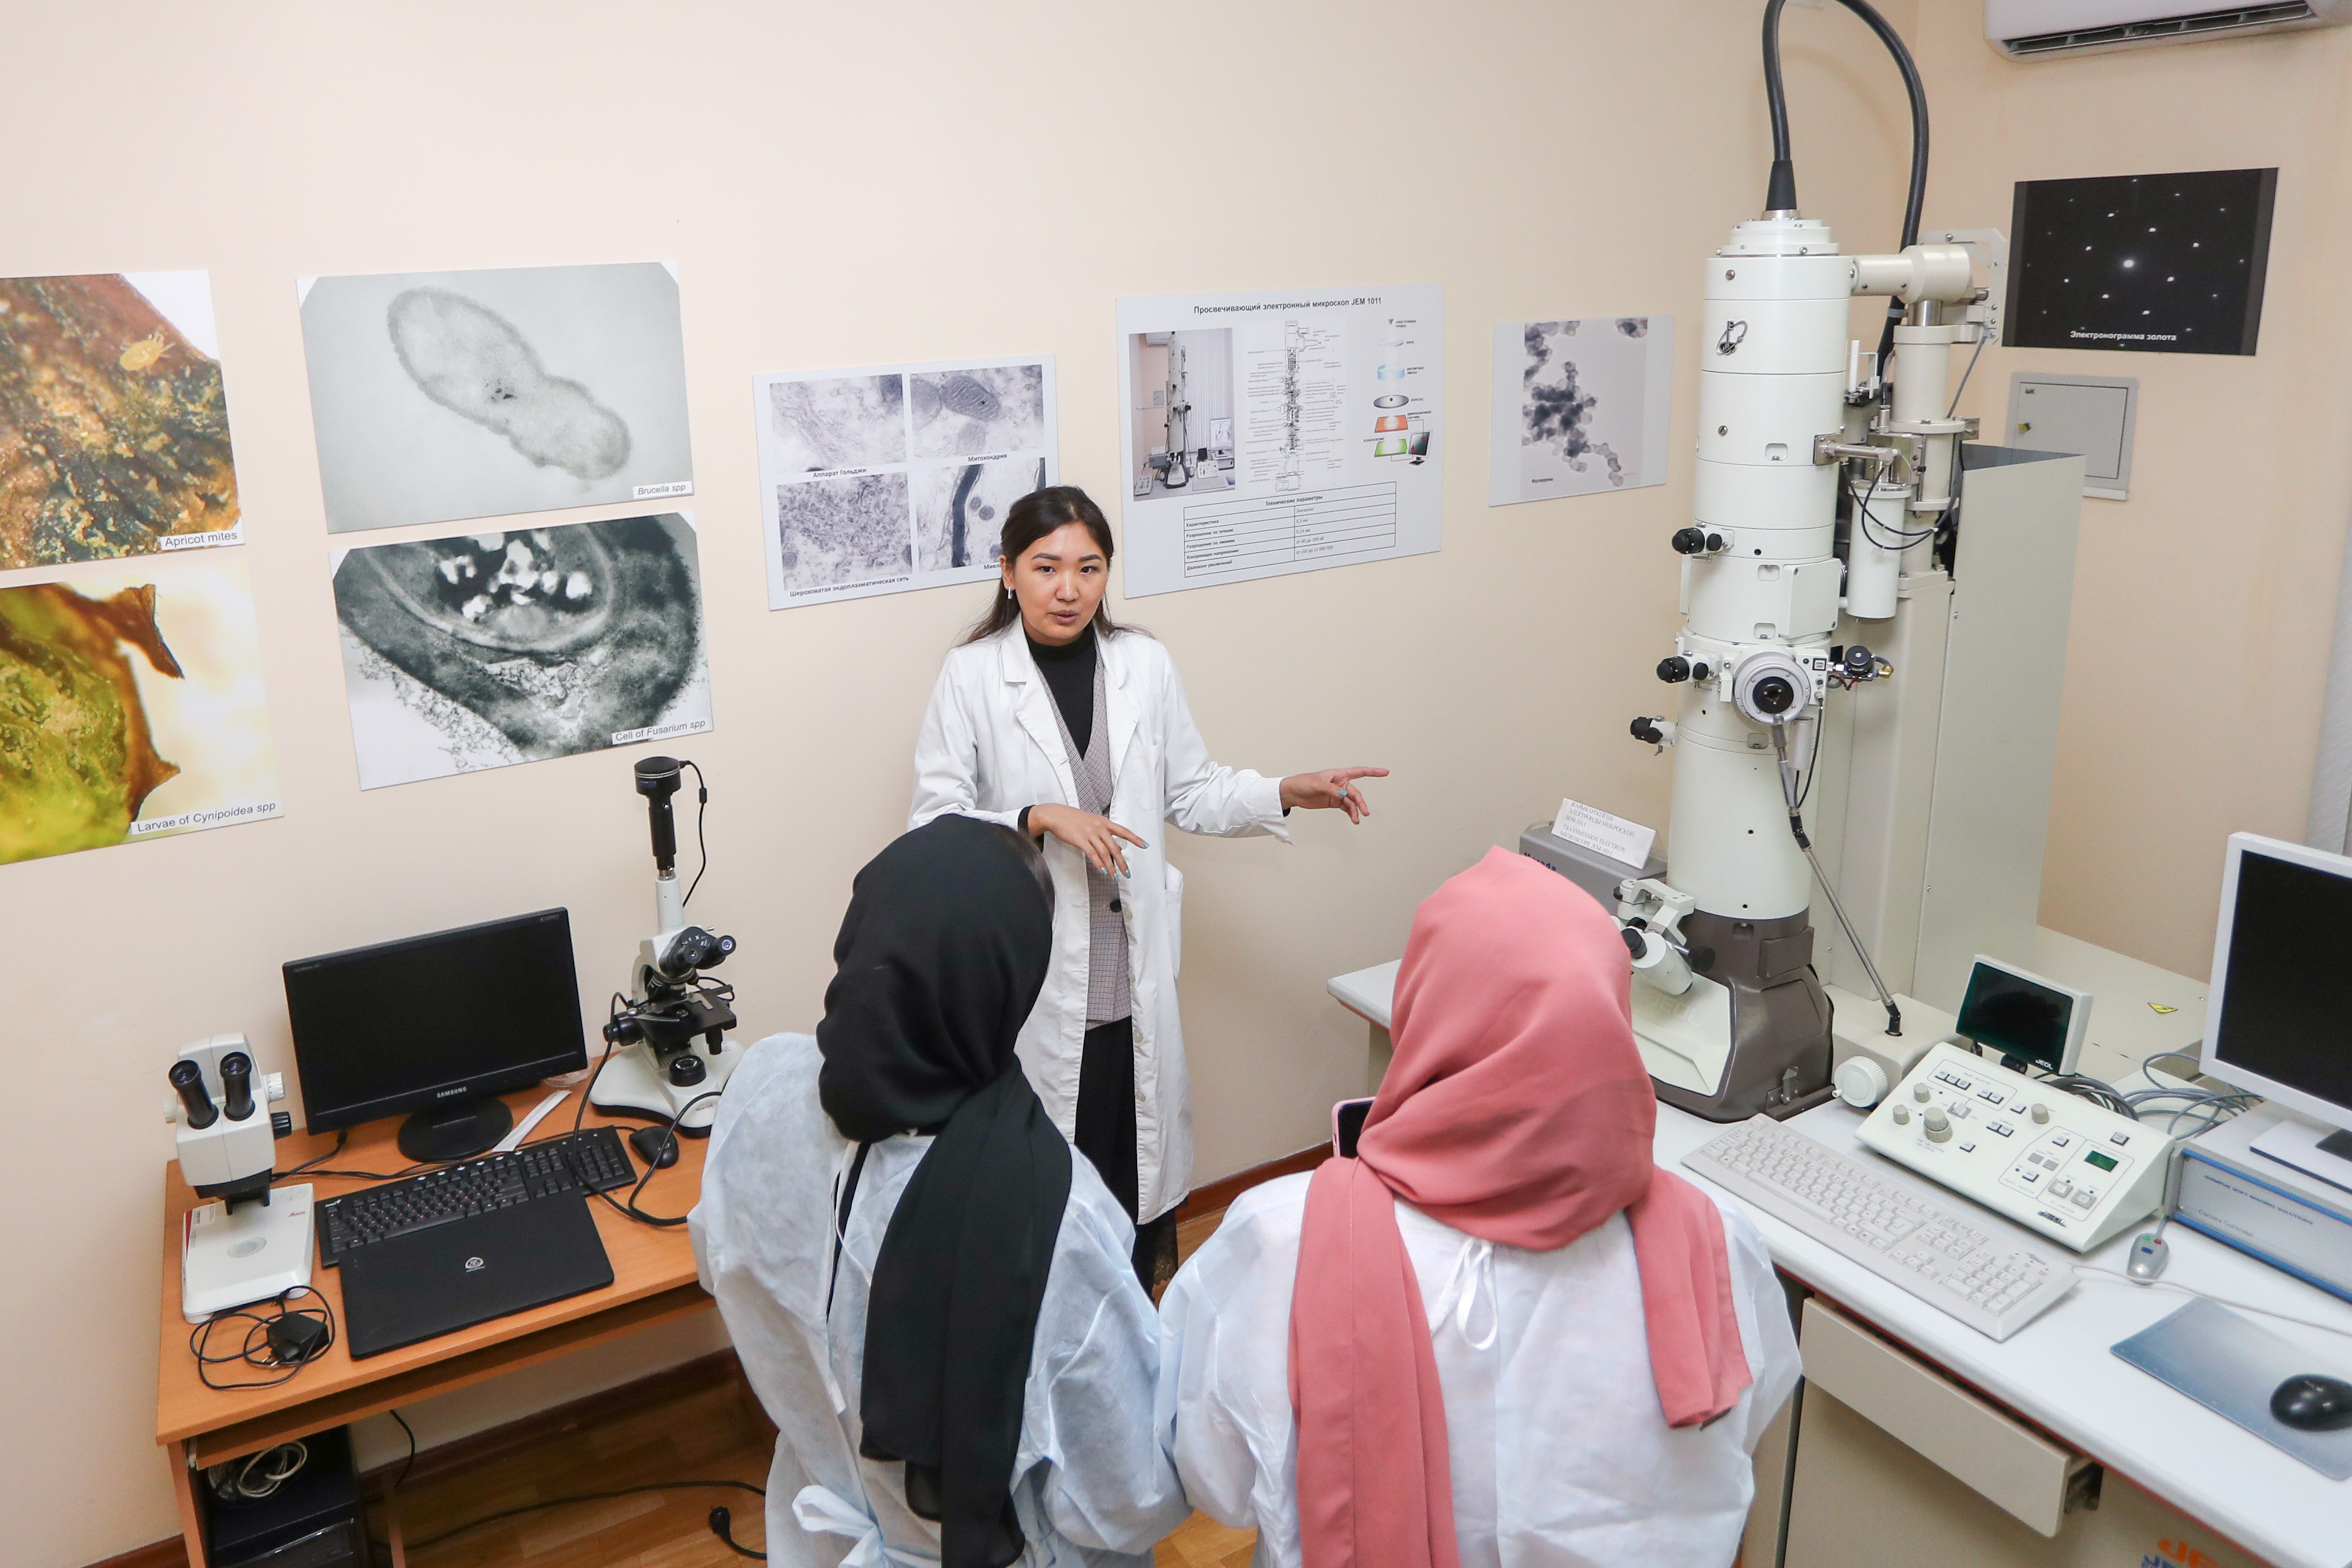 Afghan women agriscience